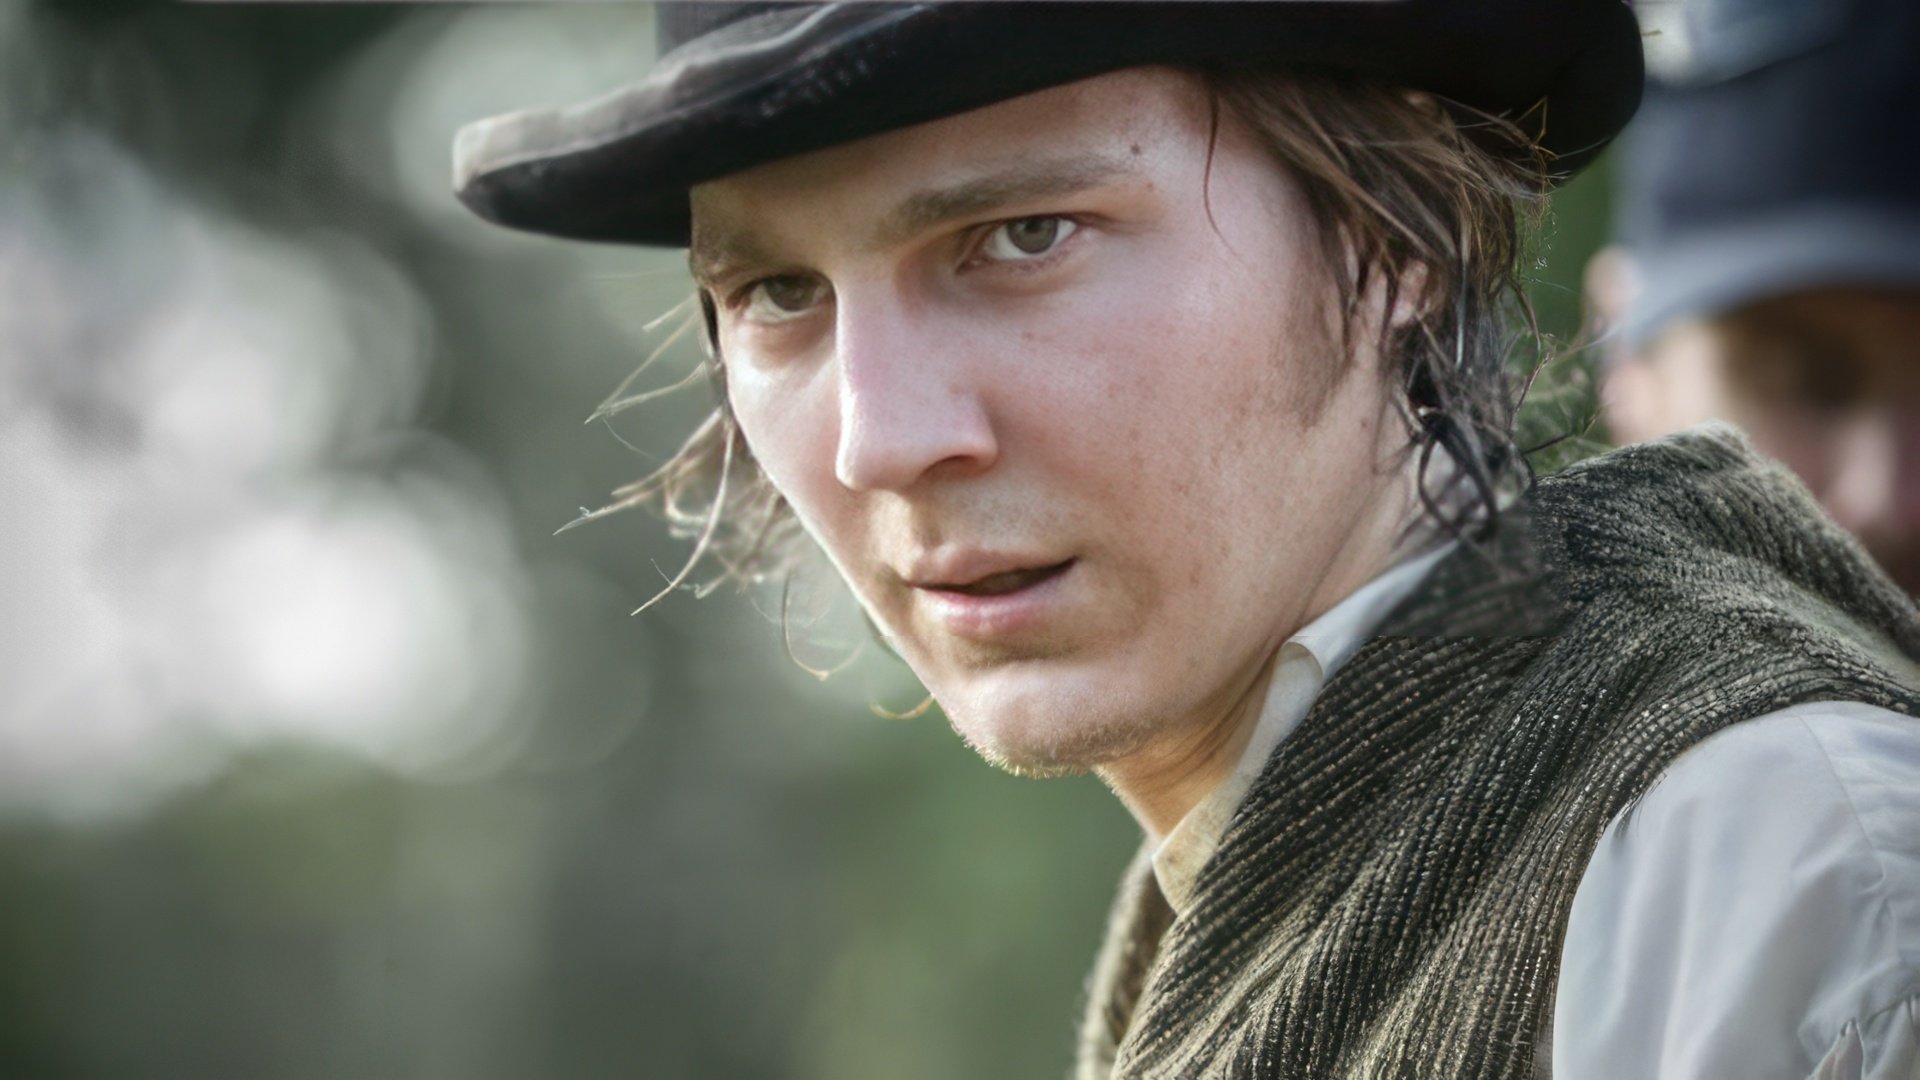 In '12 Years a Slave,' Paul Dano played a minor villain